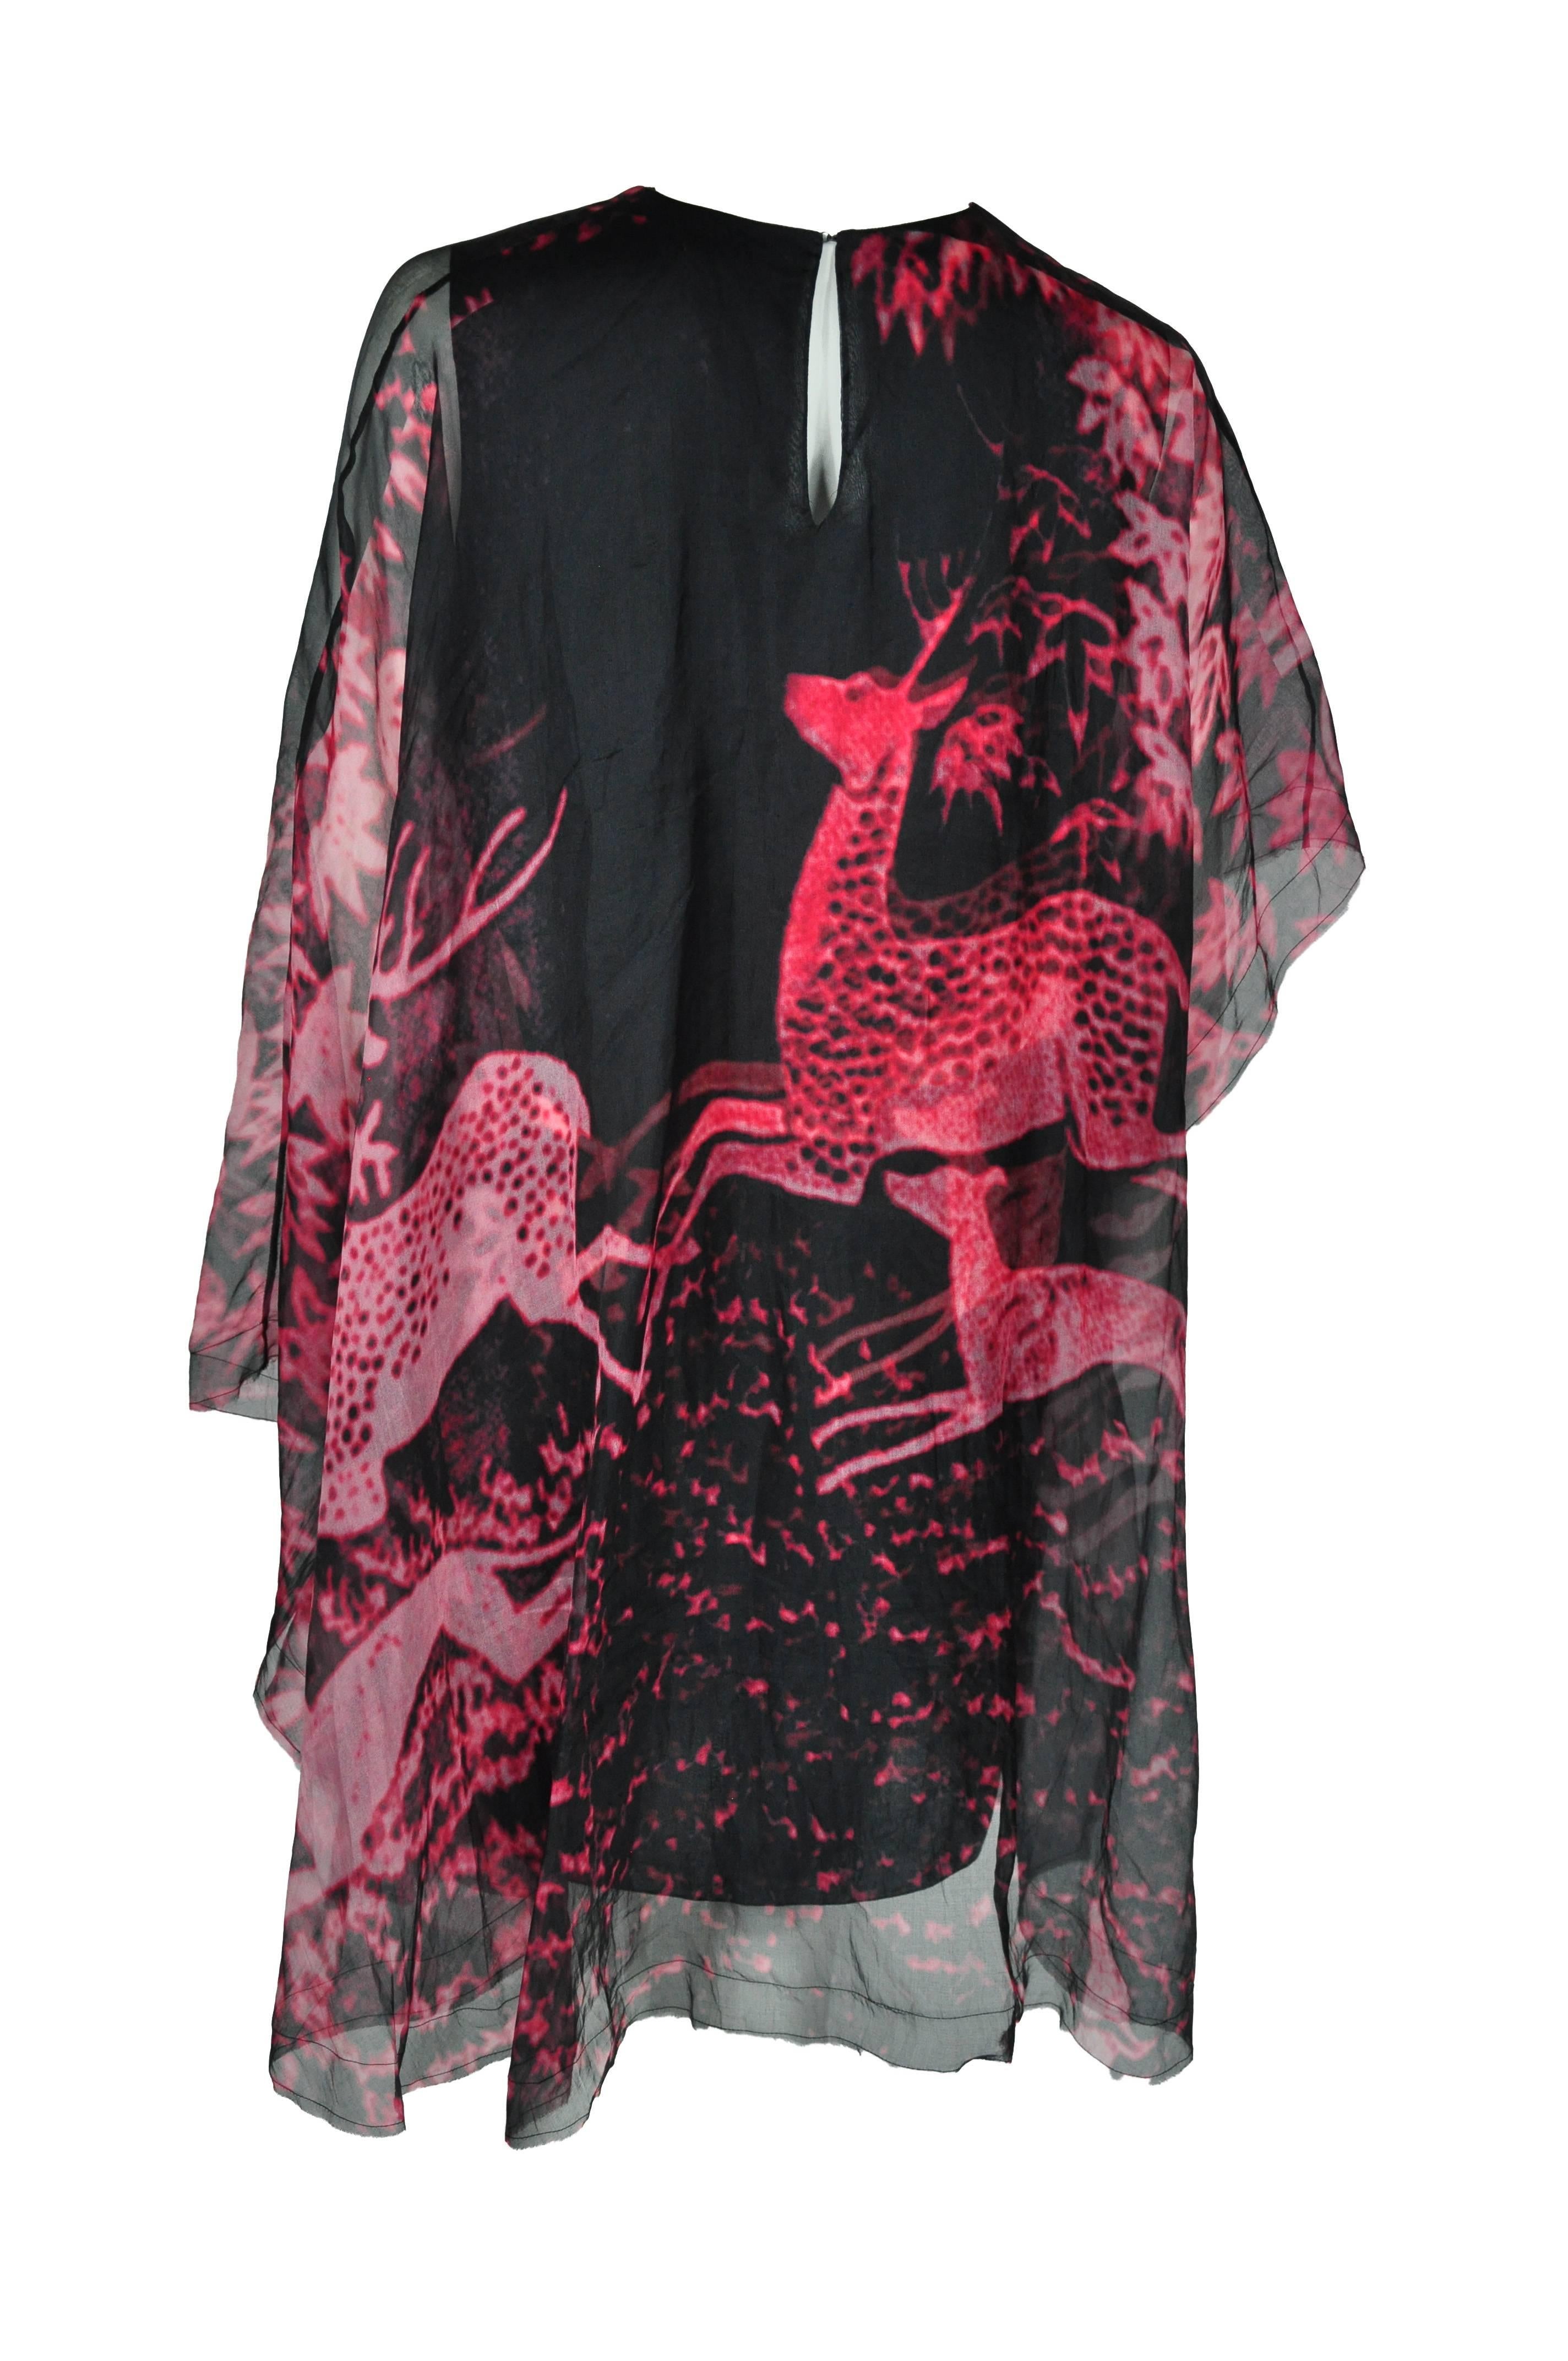 A round neck loose fit organza dress with red-deer prints from Lanvin 2015 collection. It features with asymmetric sleeves and a ruffled mini length hemline. Key hole button fastening at back.  Attached visible cotton slip dress.